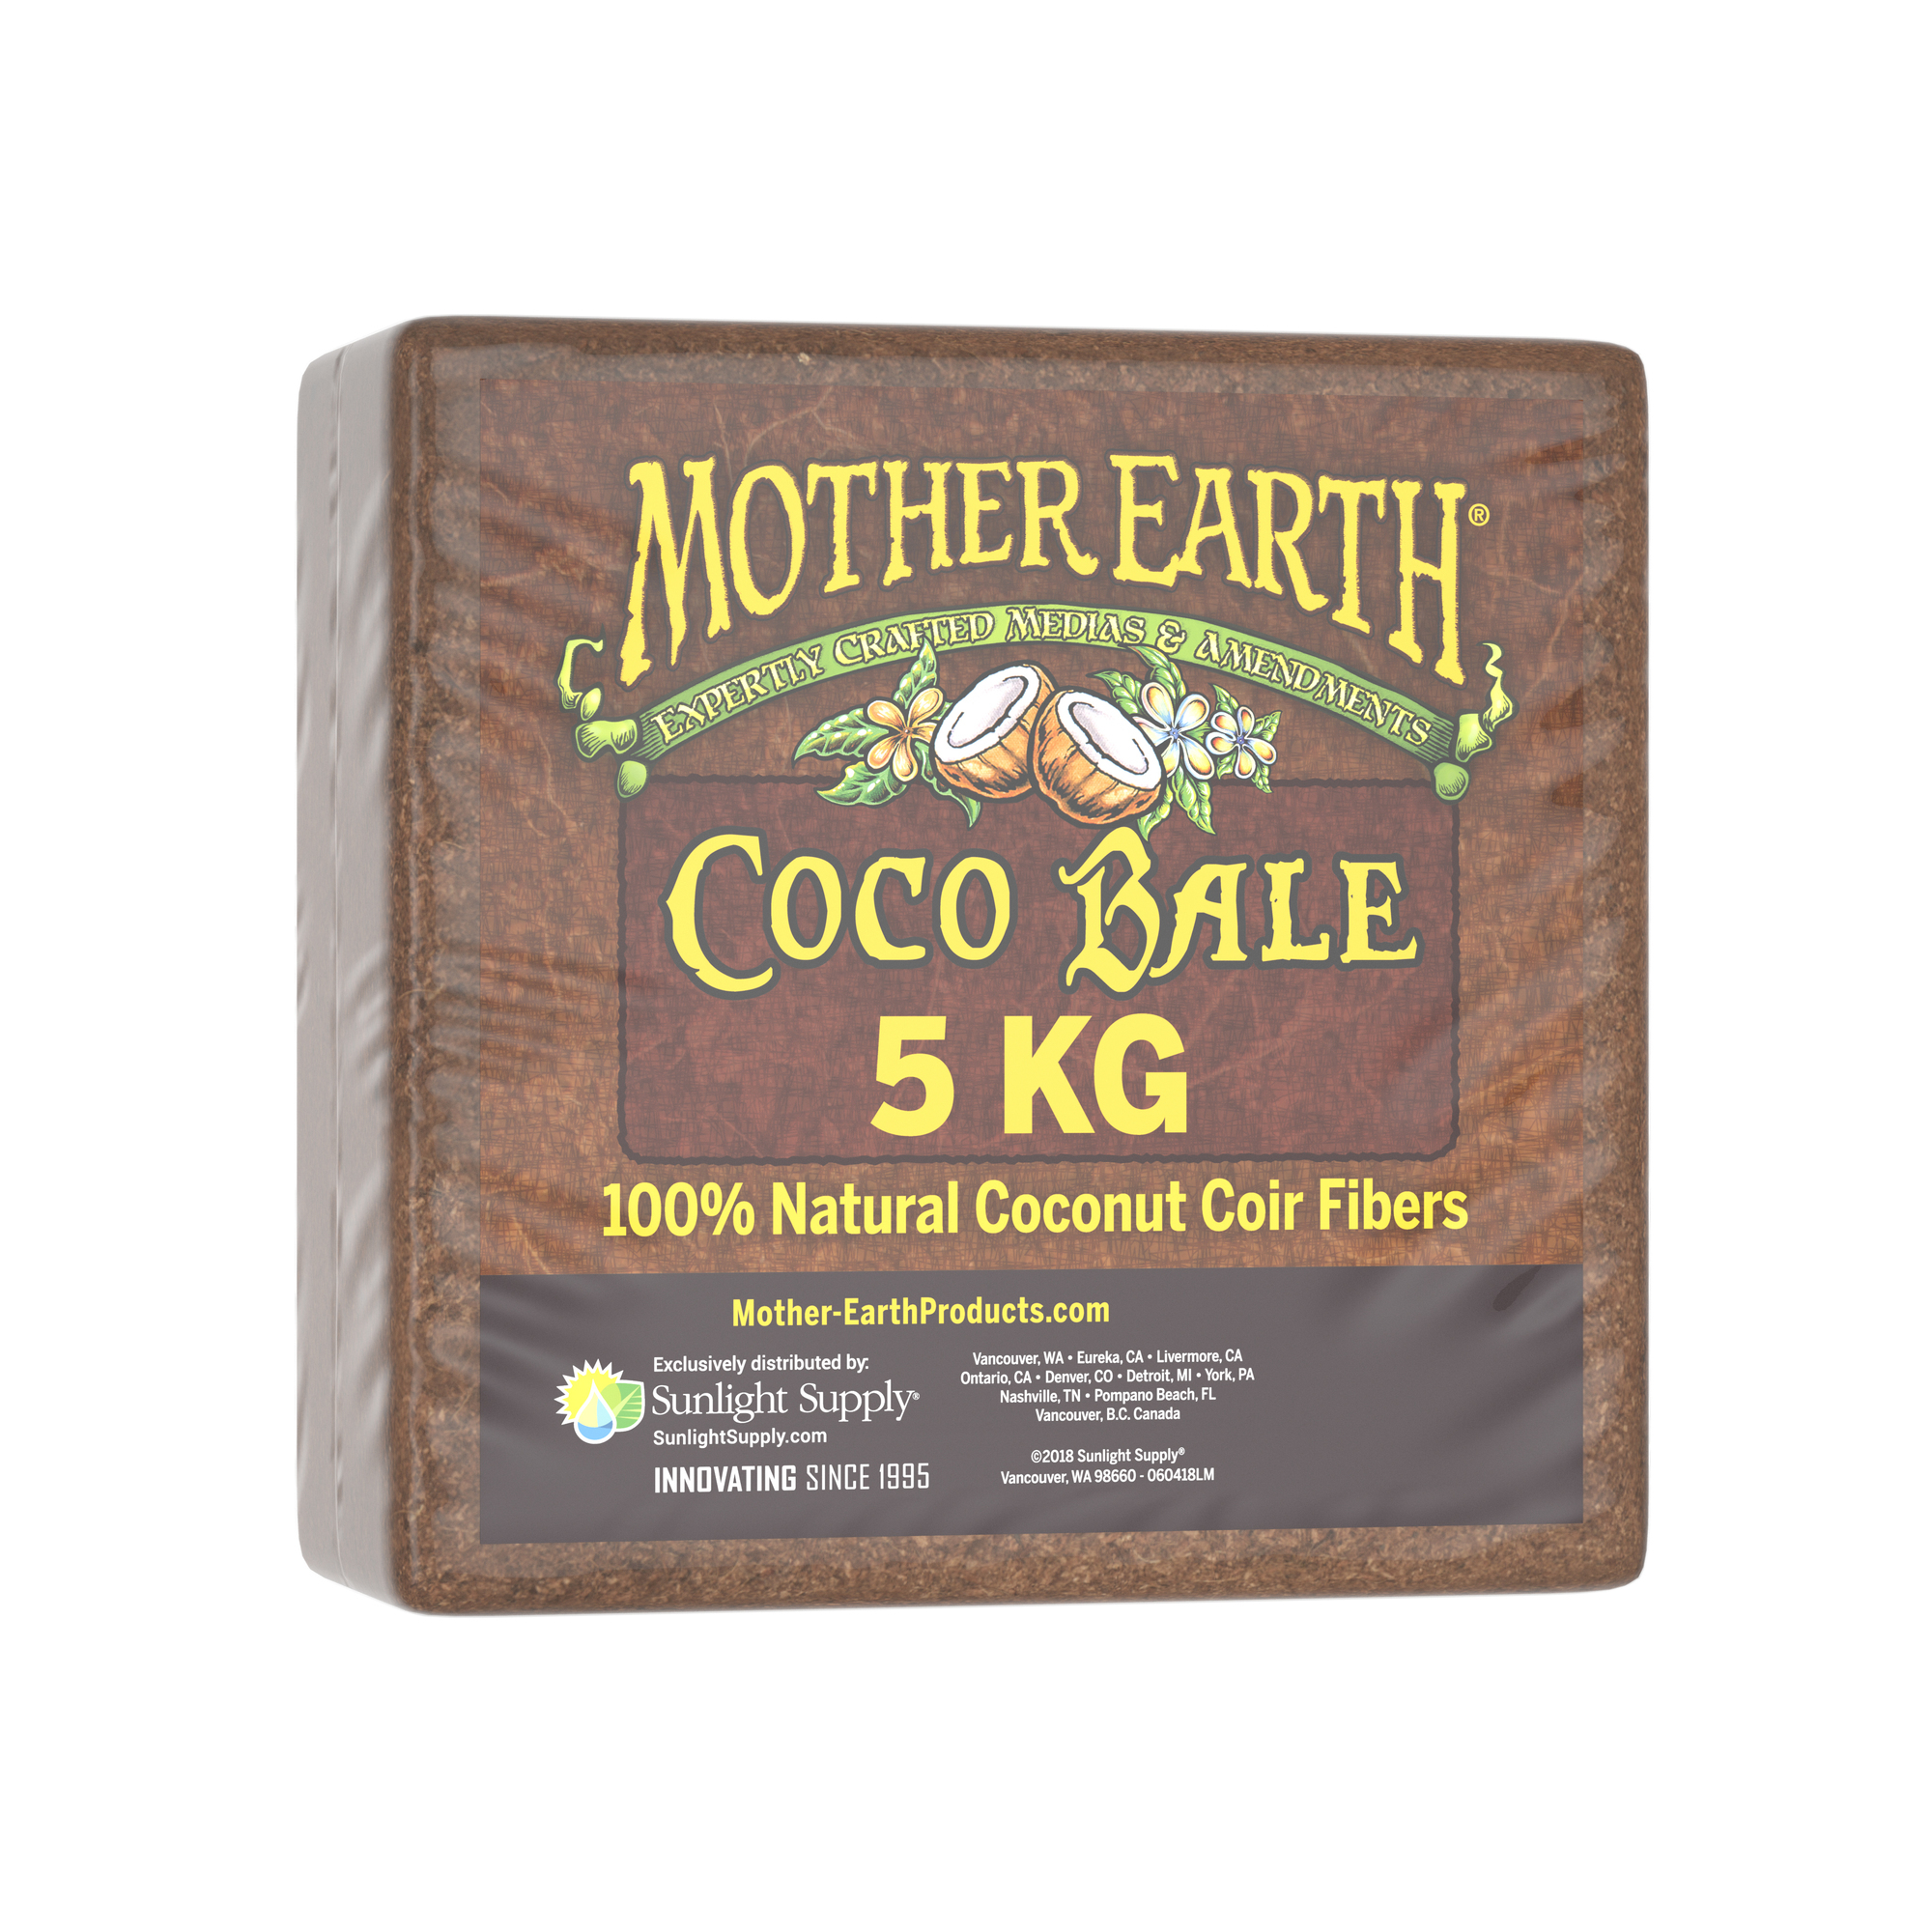 Mother Earth Coco Bale 5 kg, 100% Coconut Coir Fibers - image 2 of 8